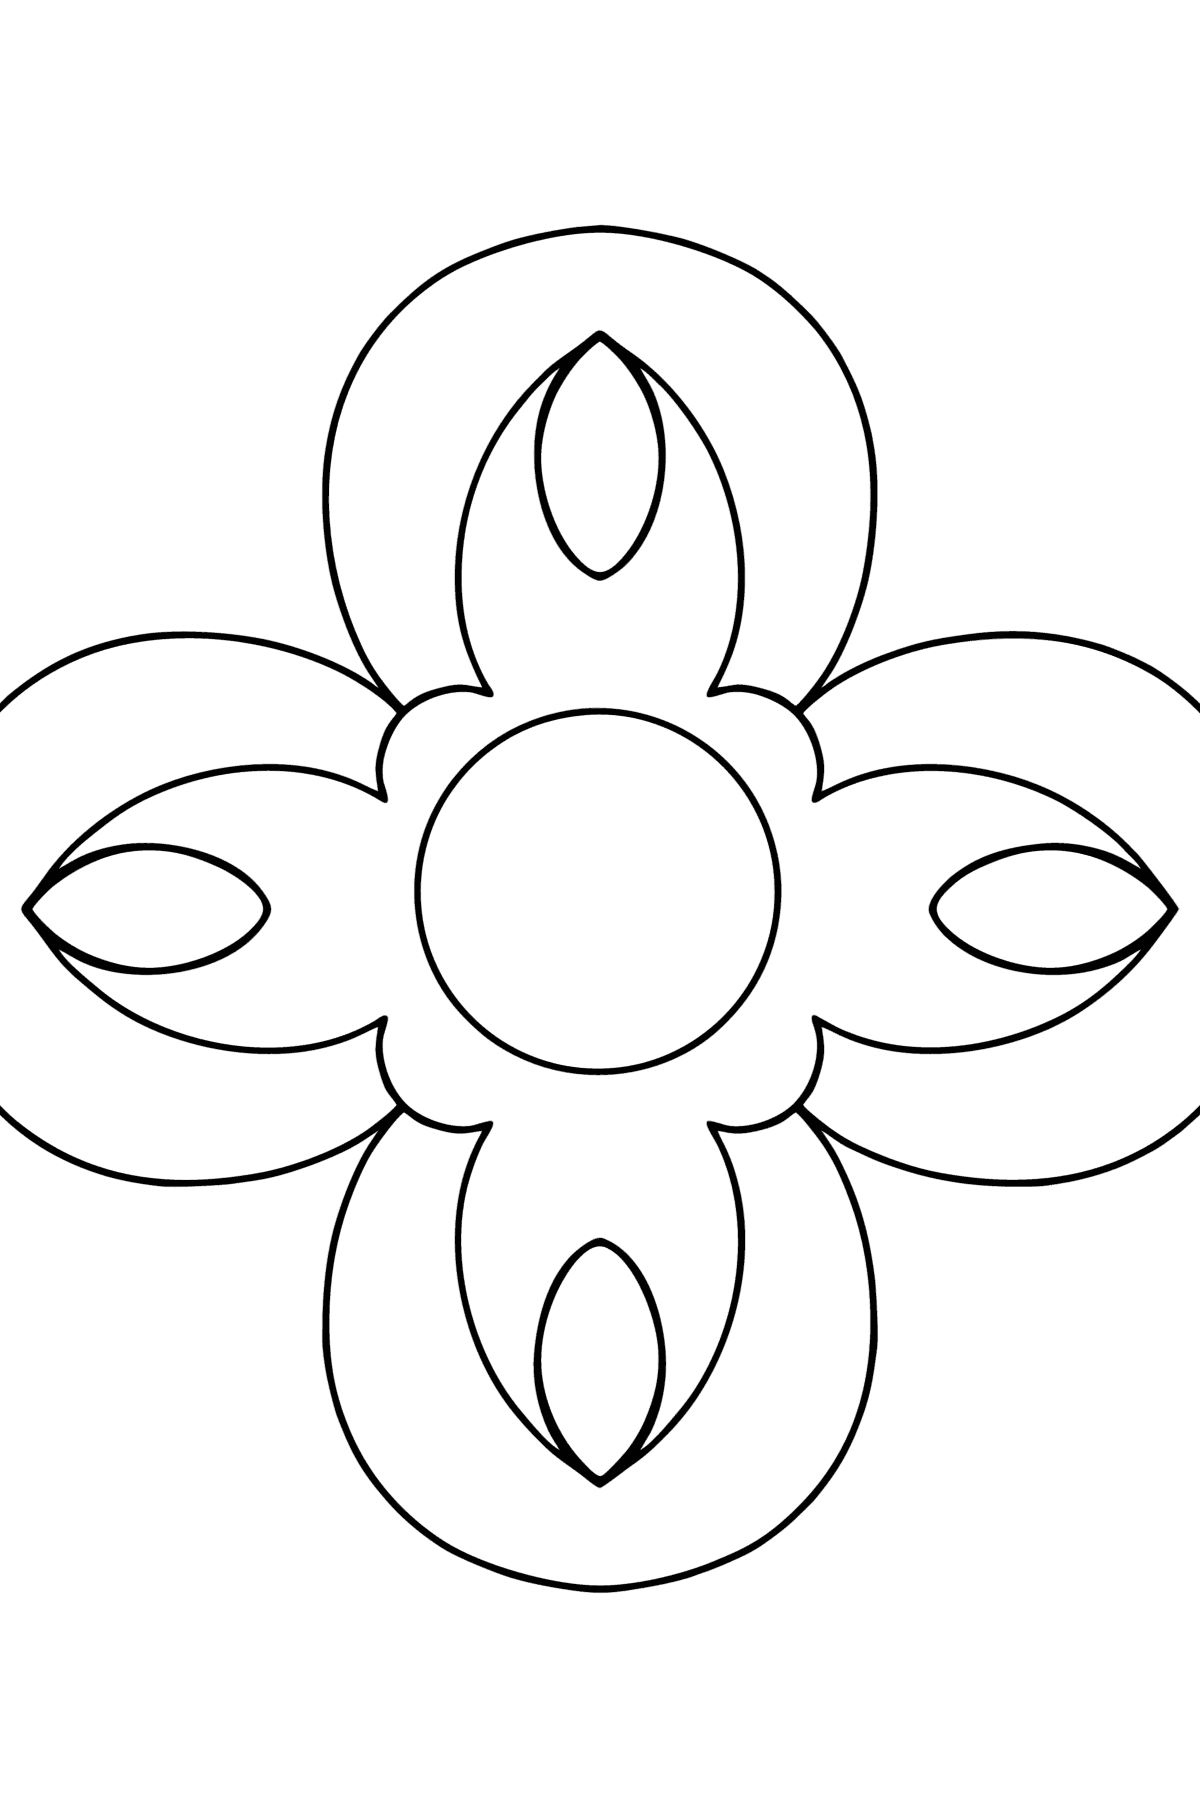 Coloring book for kids   Anti stress flower ♥ Online and Print